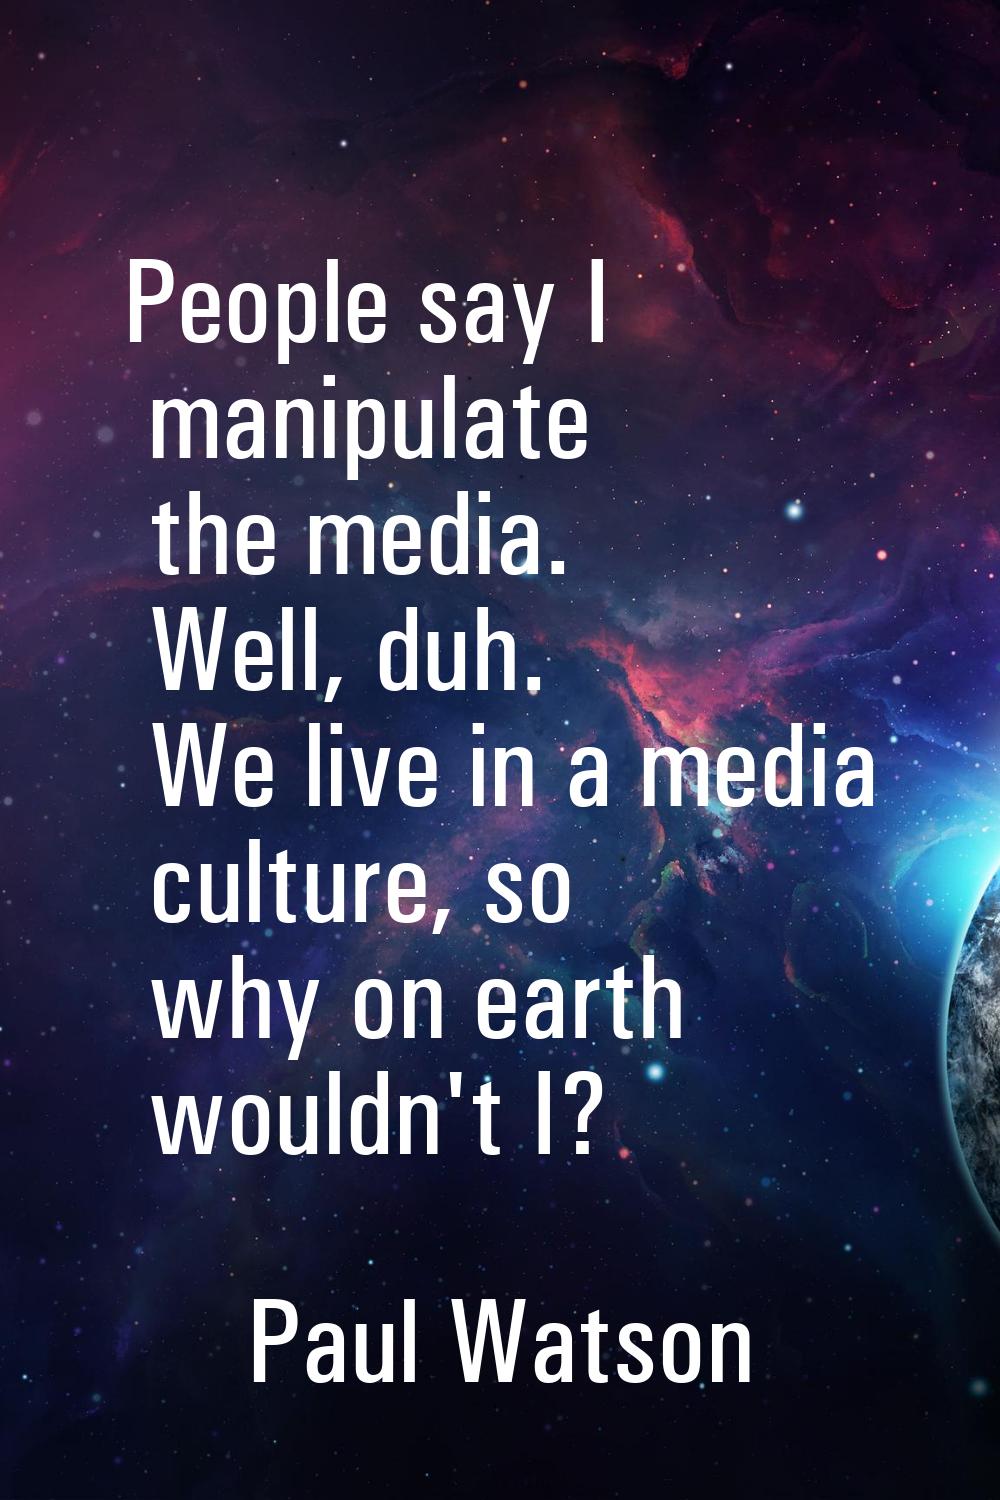 People say I manipulate the media. Well, duh. We live in a media culture, so why on earth wouldn't 